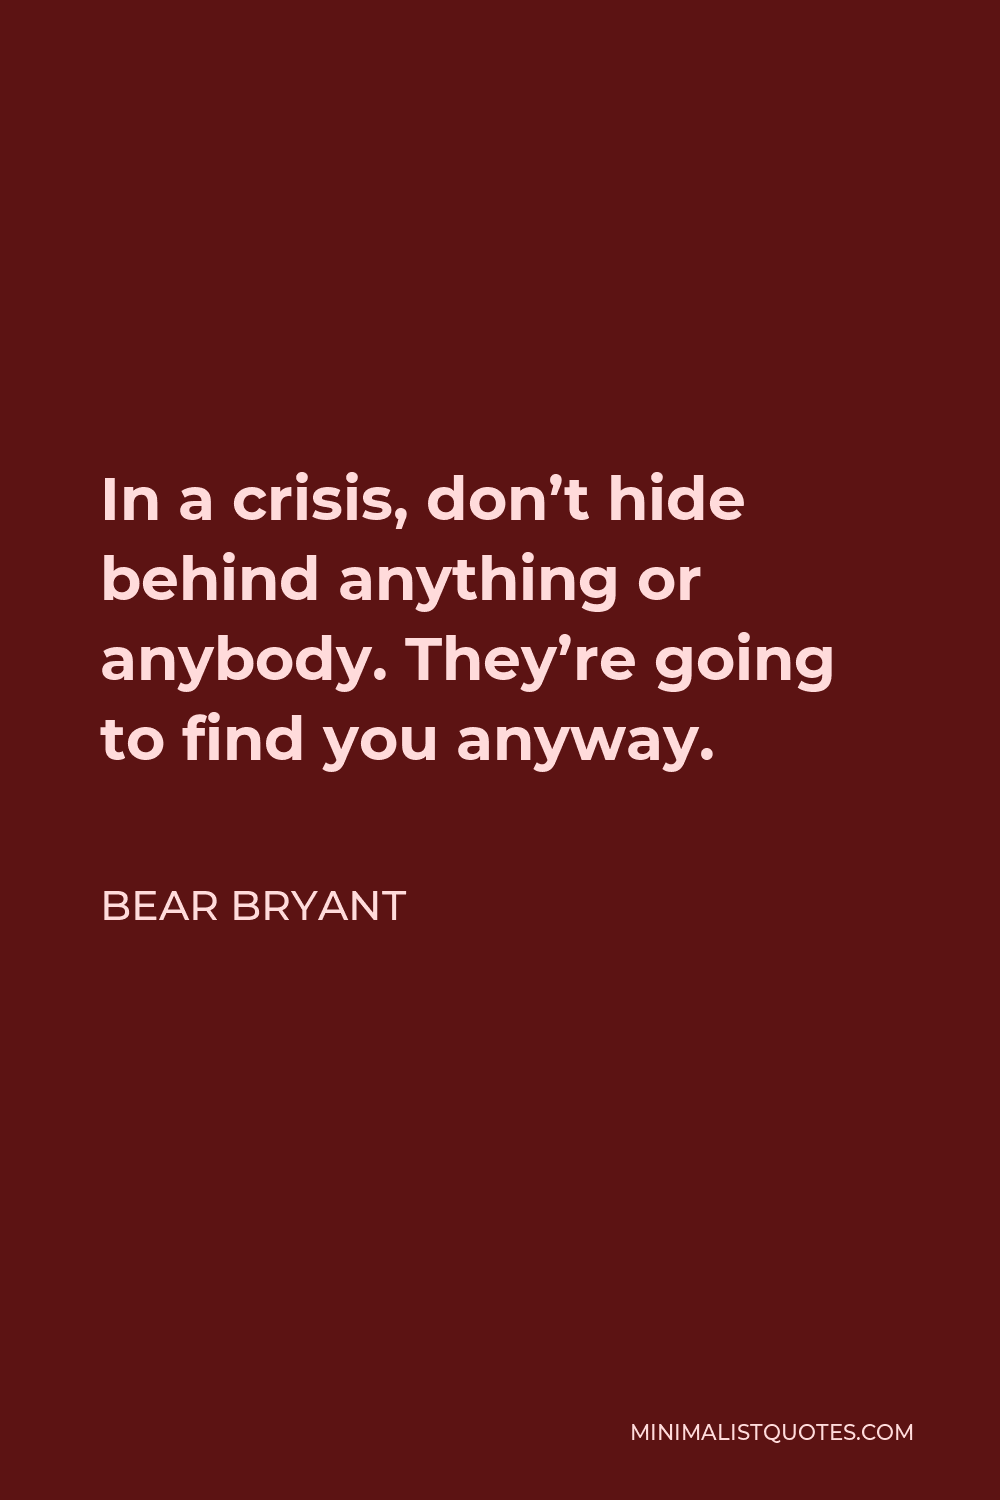 Bear Bryant Quote - In a crisis, don’t hide behind anything or anybody. They’re going to find you anyway.